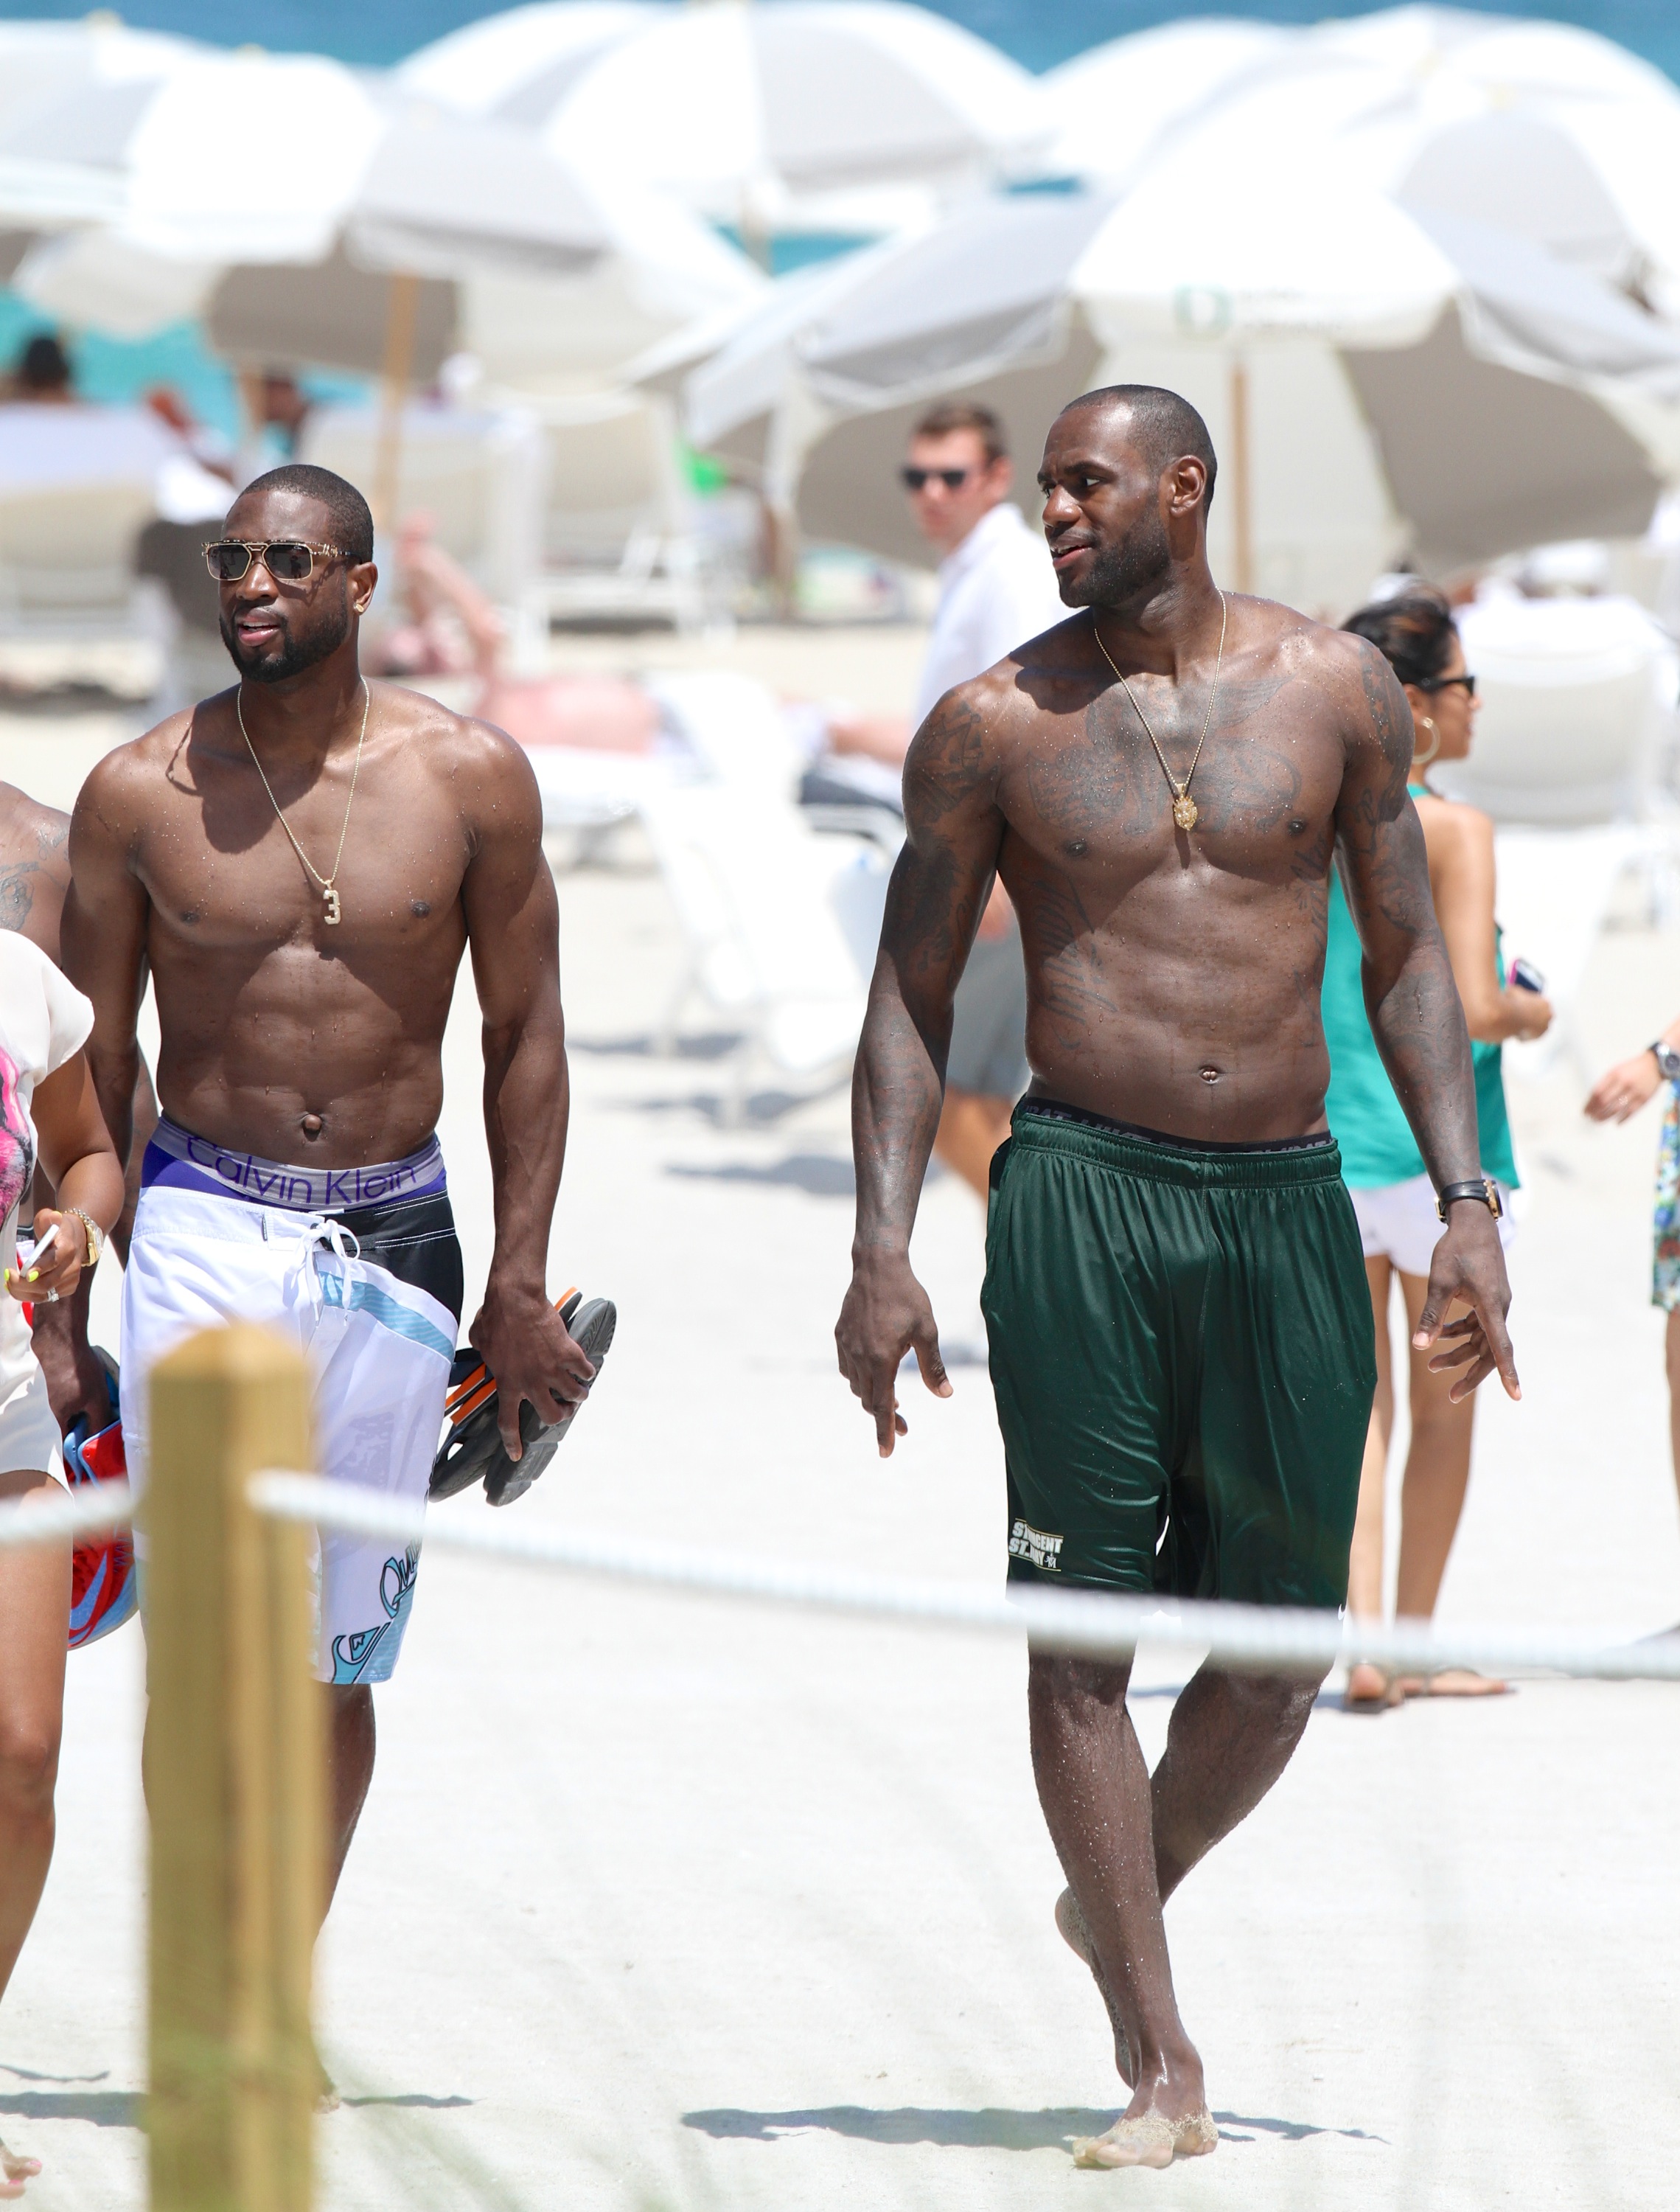 Lebron James Opts Out Of Contract, But Here’s Why He’ll Stay In MIA ...